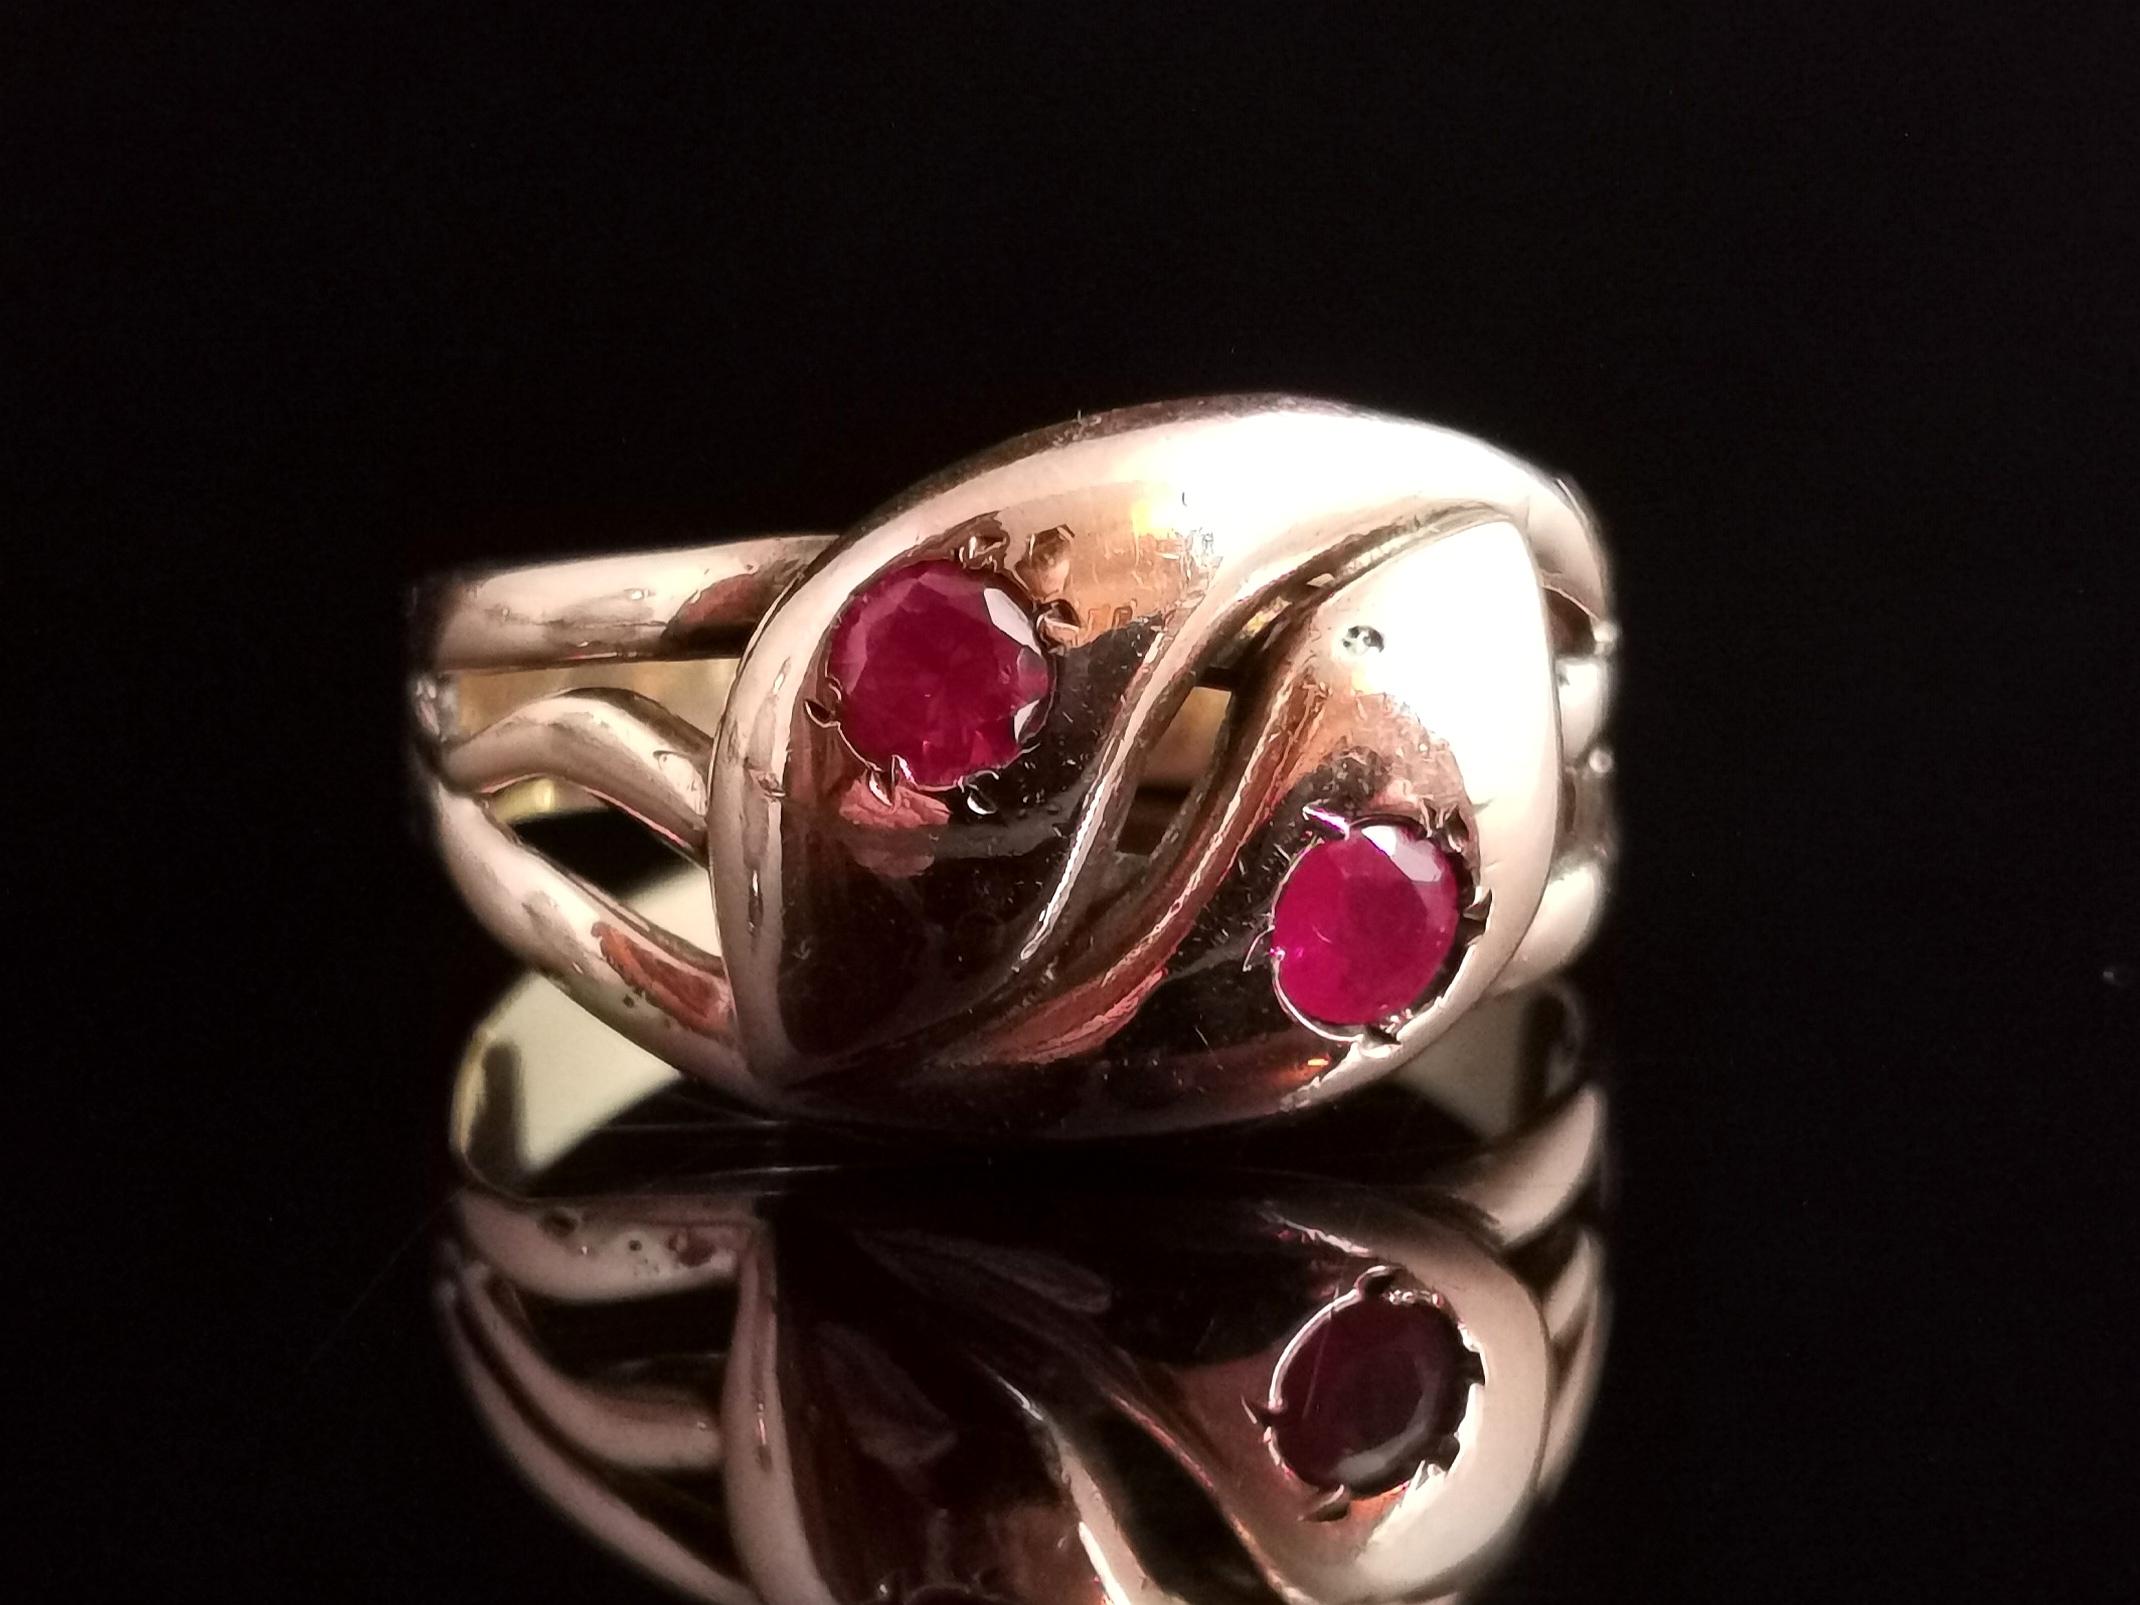 A beautiful antique, late Victorian Ruby snake ring.

Coils of buttery 9ct, antique yellow gold forming the entwined bodies of two snakes, the heads are both well detailed and both set with a gorgeous rich reddish Pink Ruby, it has decorative cut